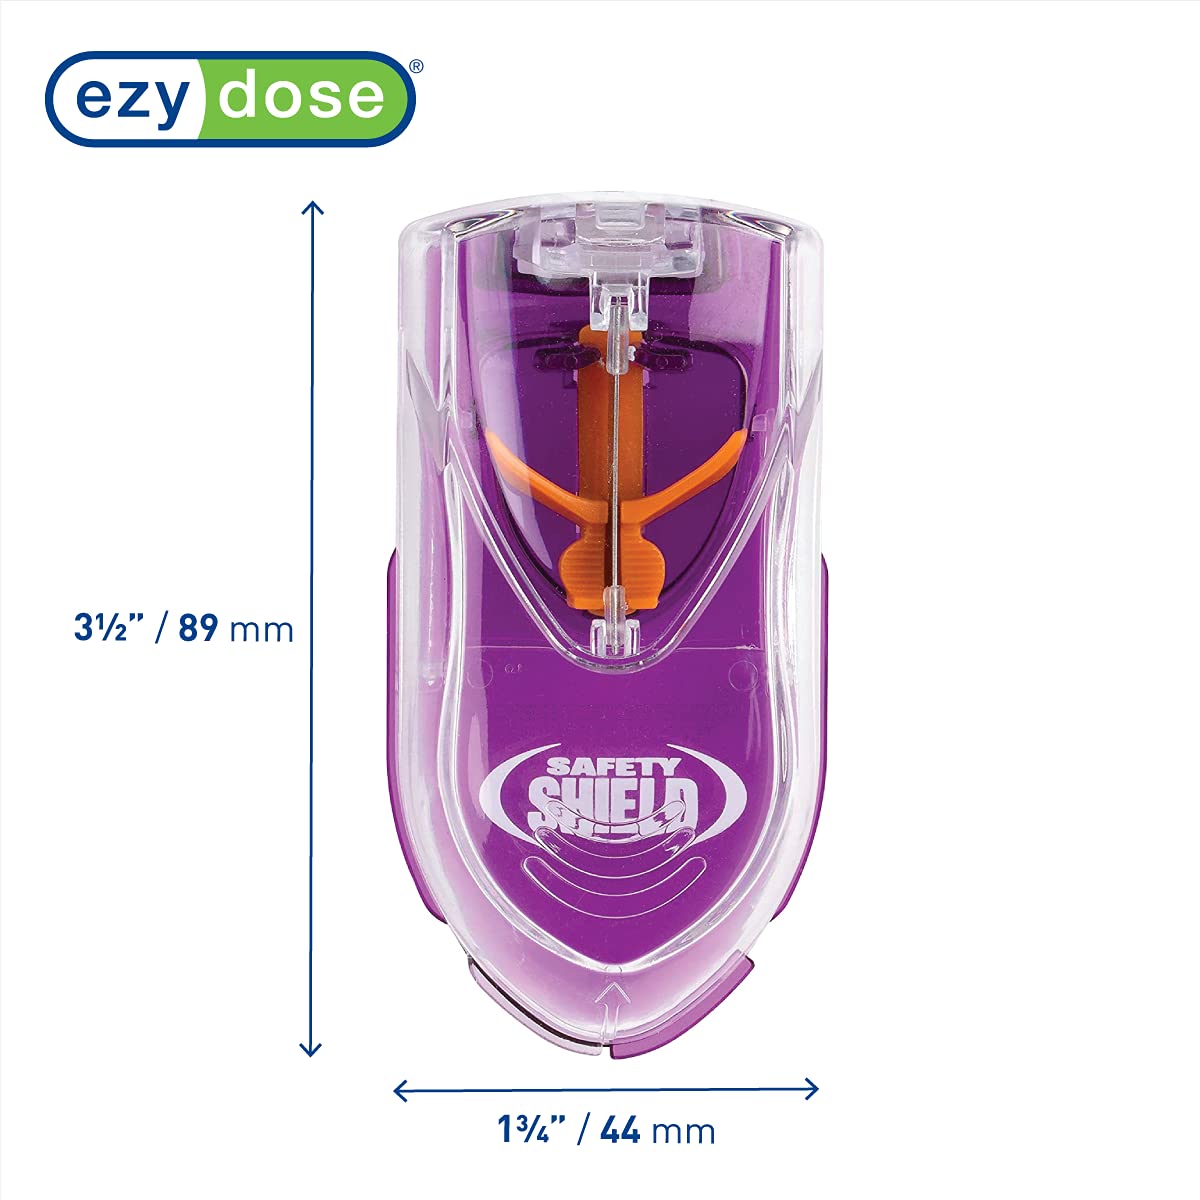 Ezy Dose Pill Cutter with Safety Shield, Safely Cut Pills and Vitamins, Pill Splitter, Colors may vary